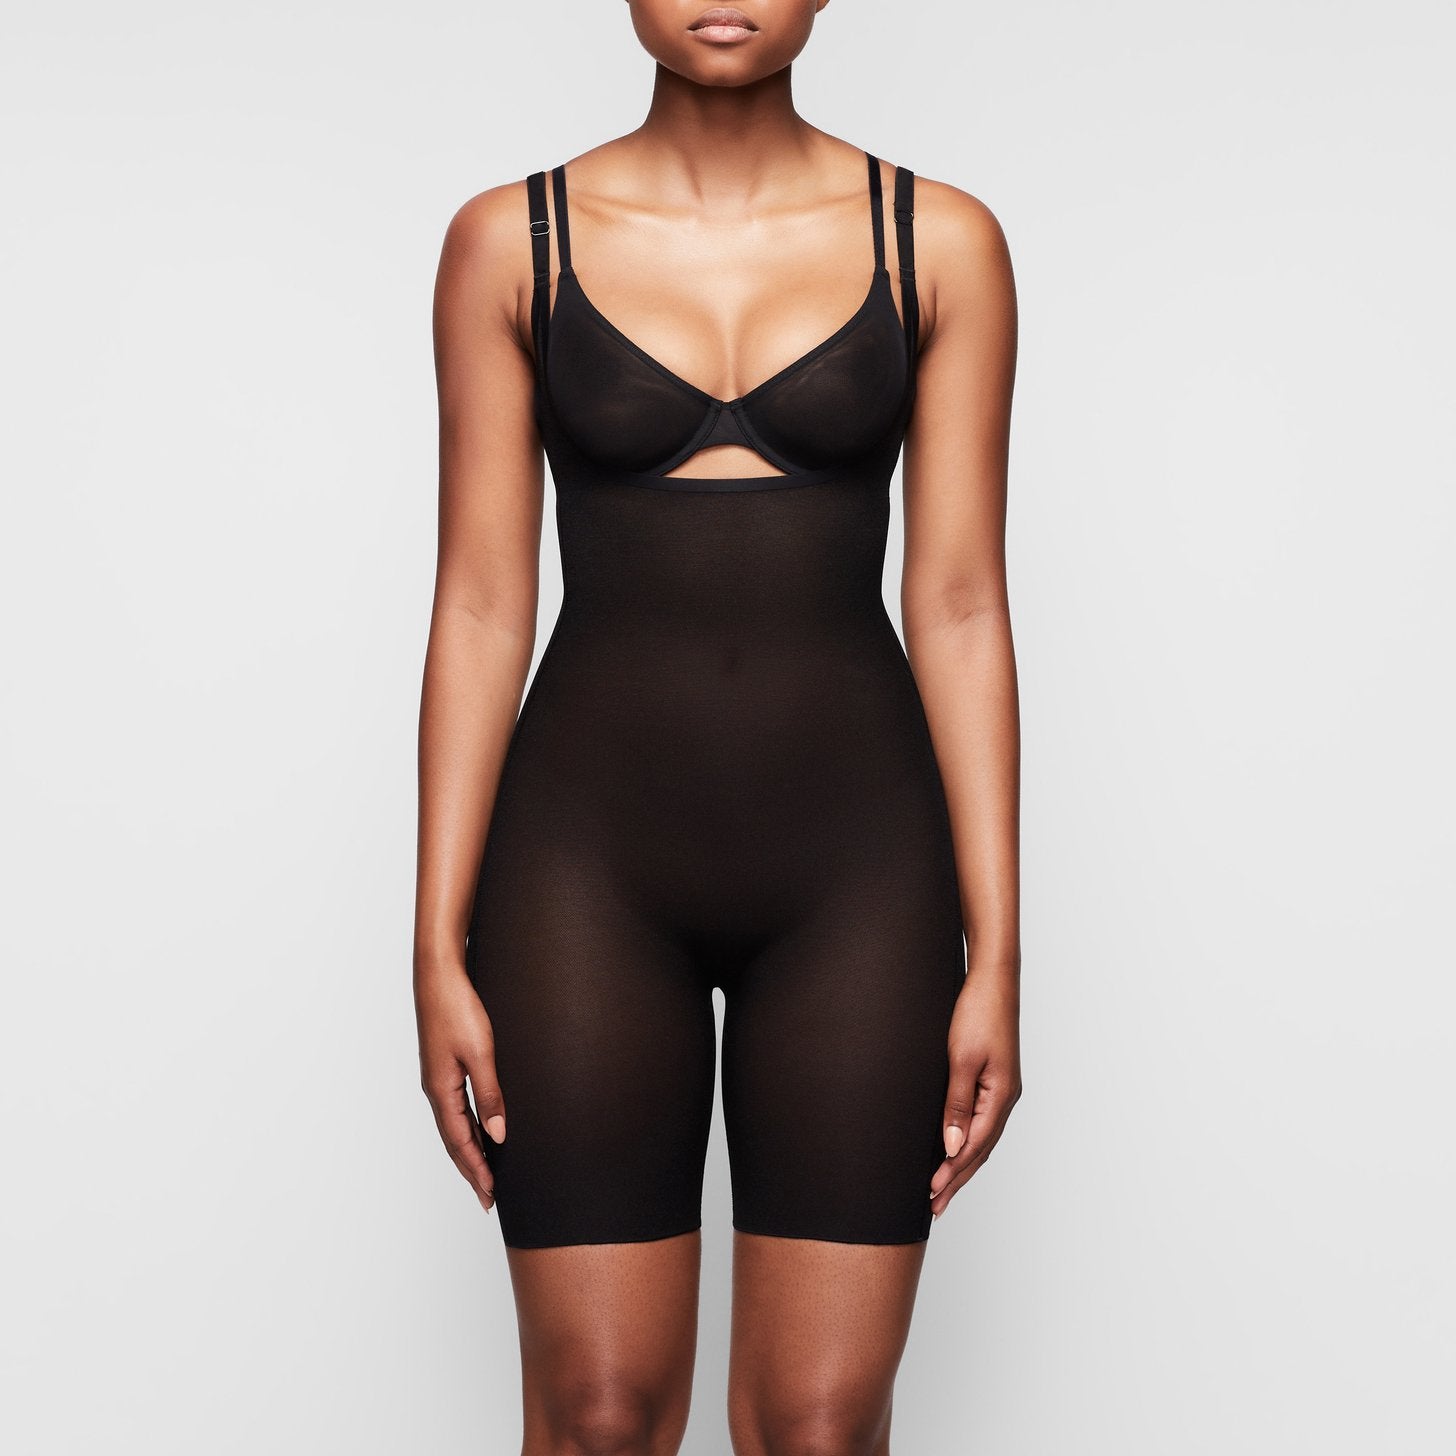 Happy Black Friday! If you're shopping for SHAPEWEAR I've found a Skims dupe  🤍😜 YIANNA is a brand creating the next generation of…